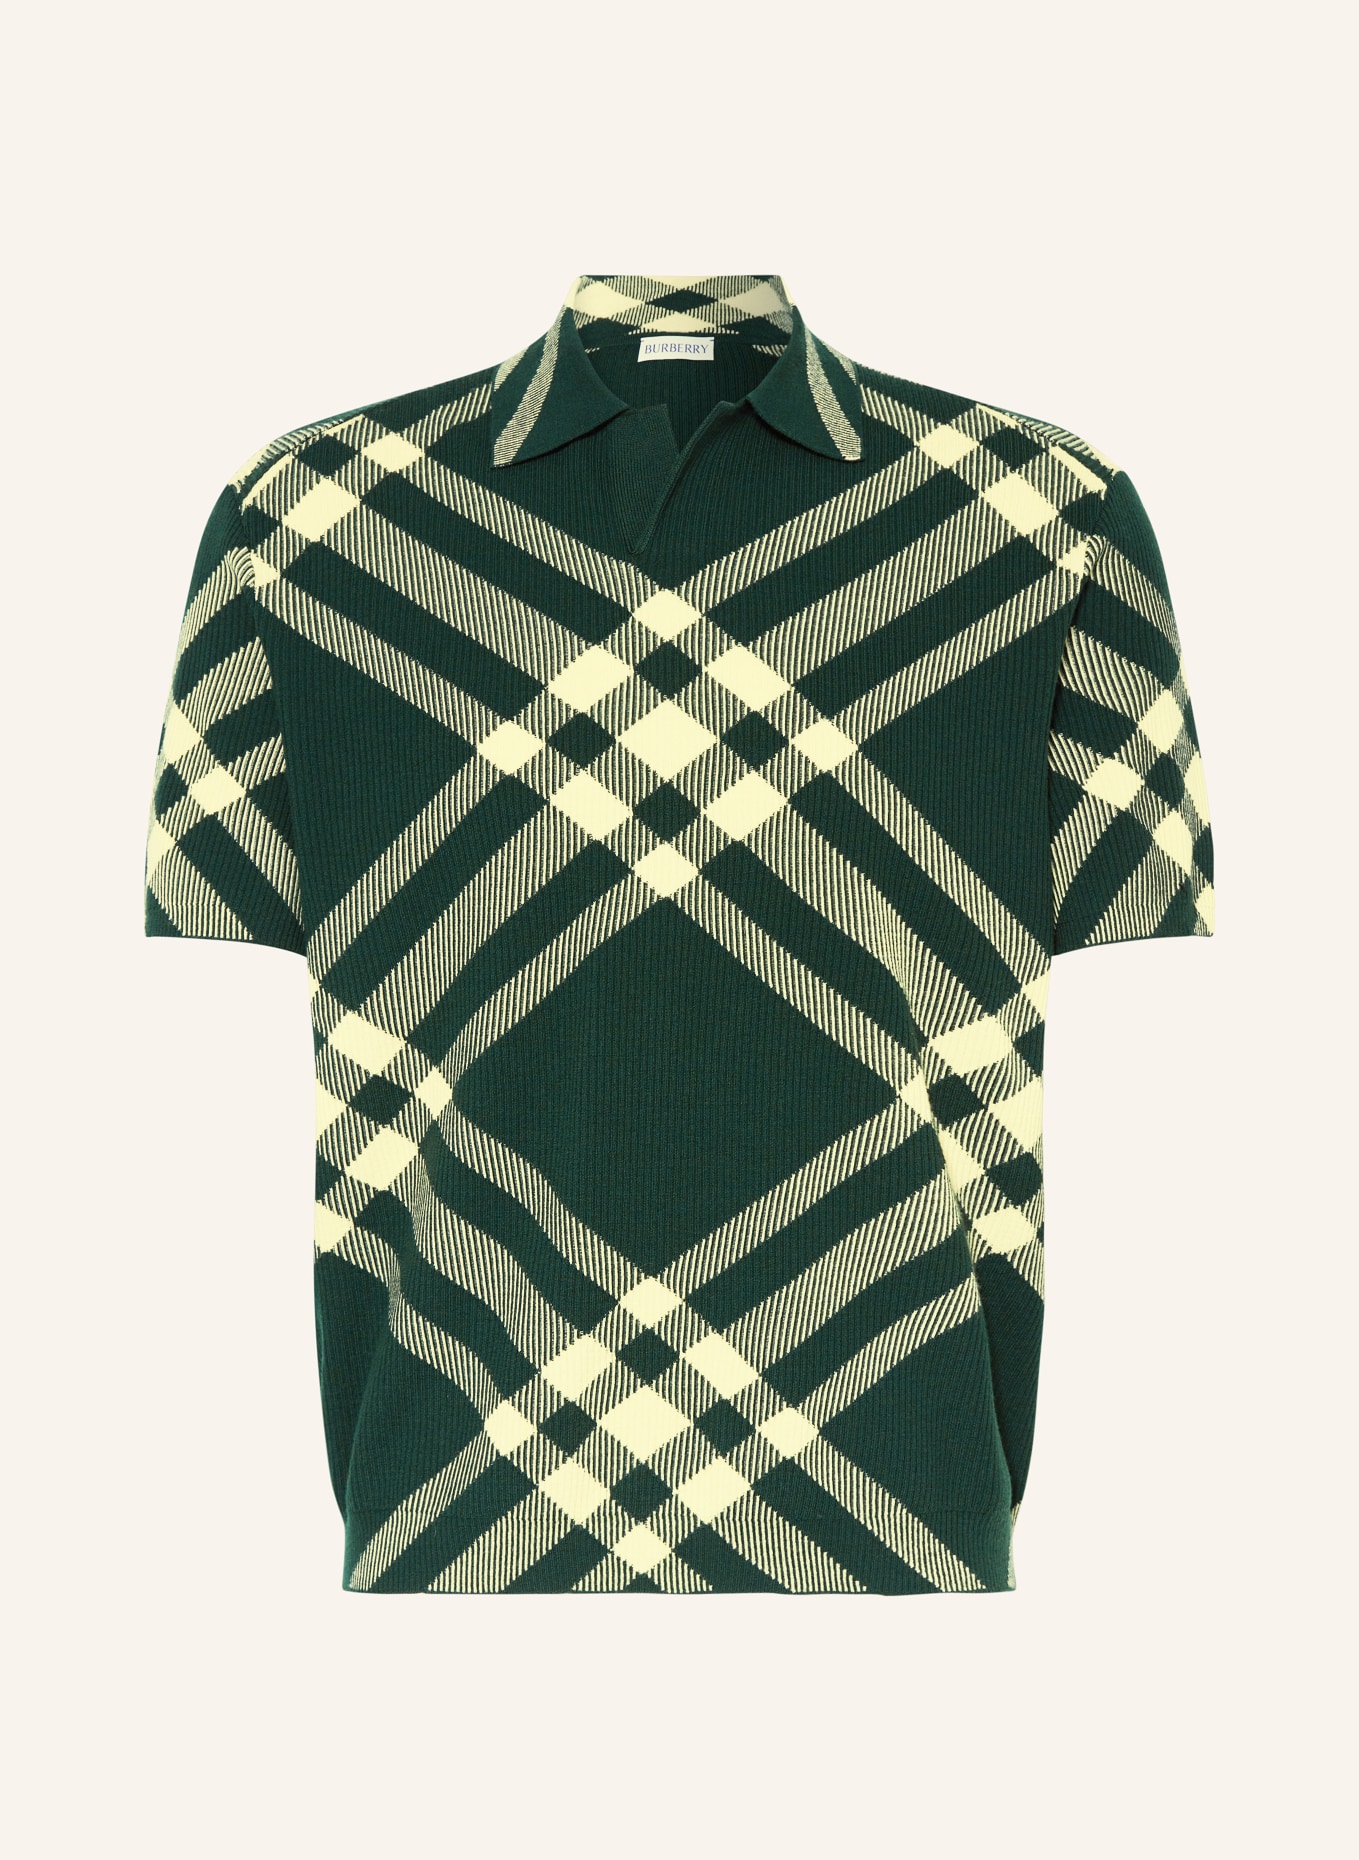 BURBERRY Knitted polo shirt DAFFODIL classic fit, Color: DARK GREEN/ LIGHT YELLOW (Image 1)